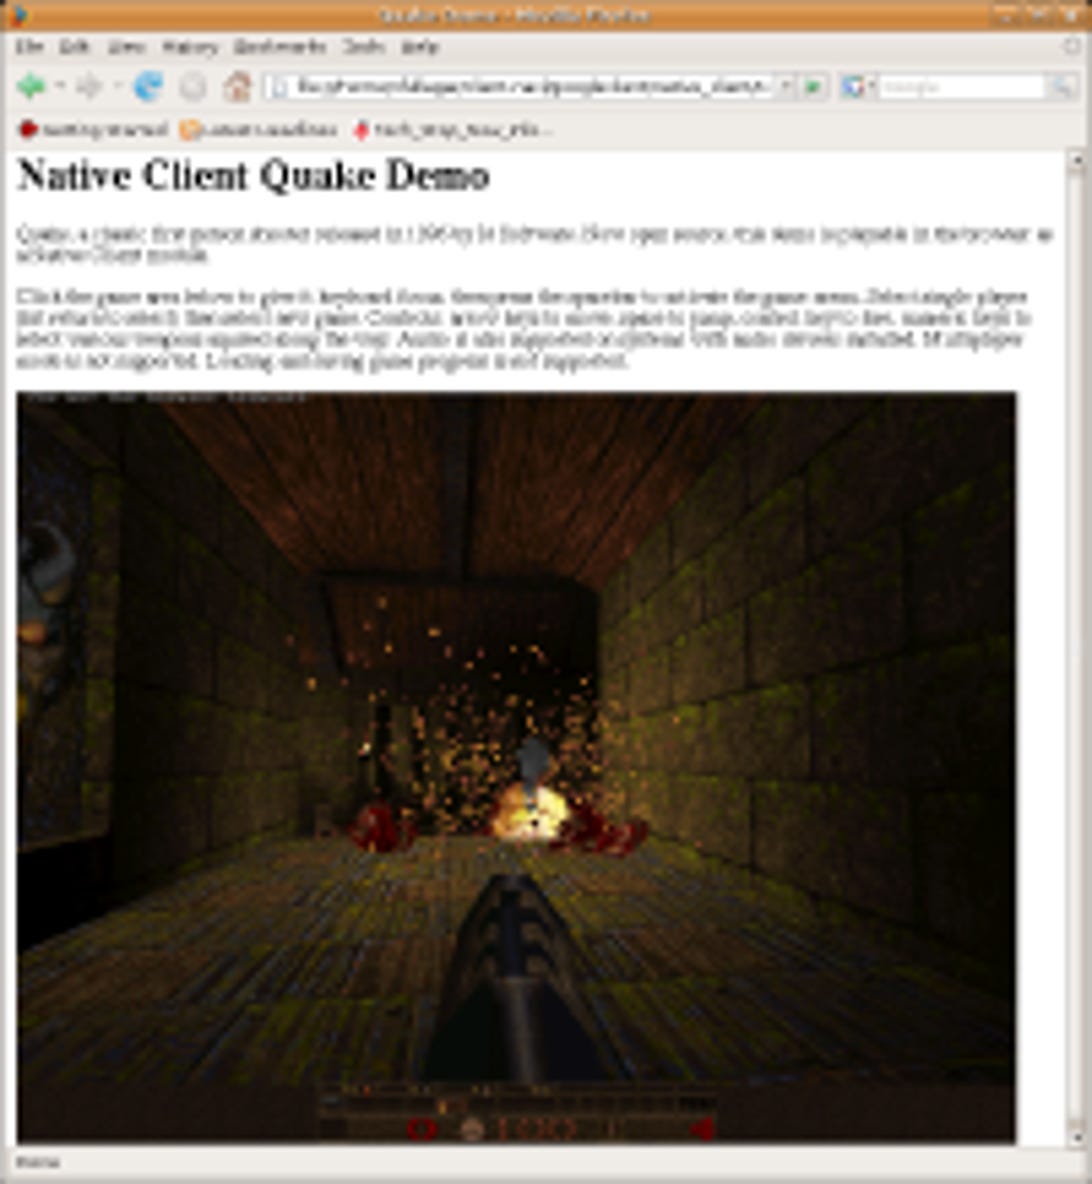 Google showed off its Native Client software with this version of the Quake video game.